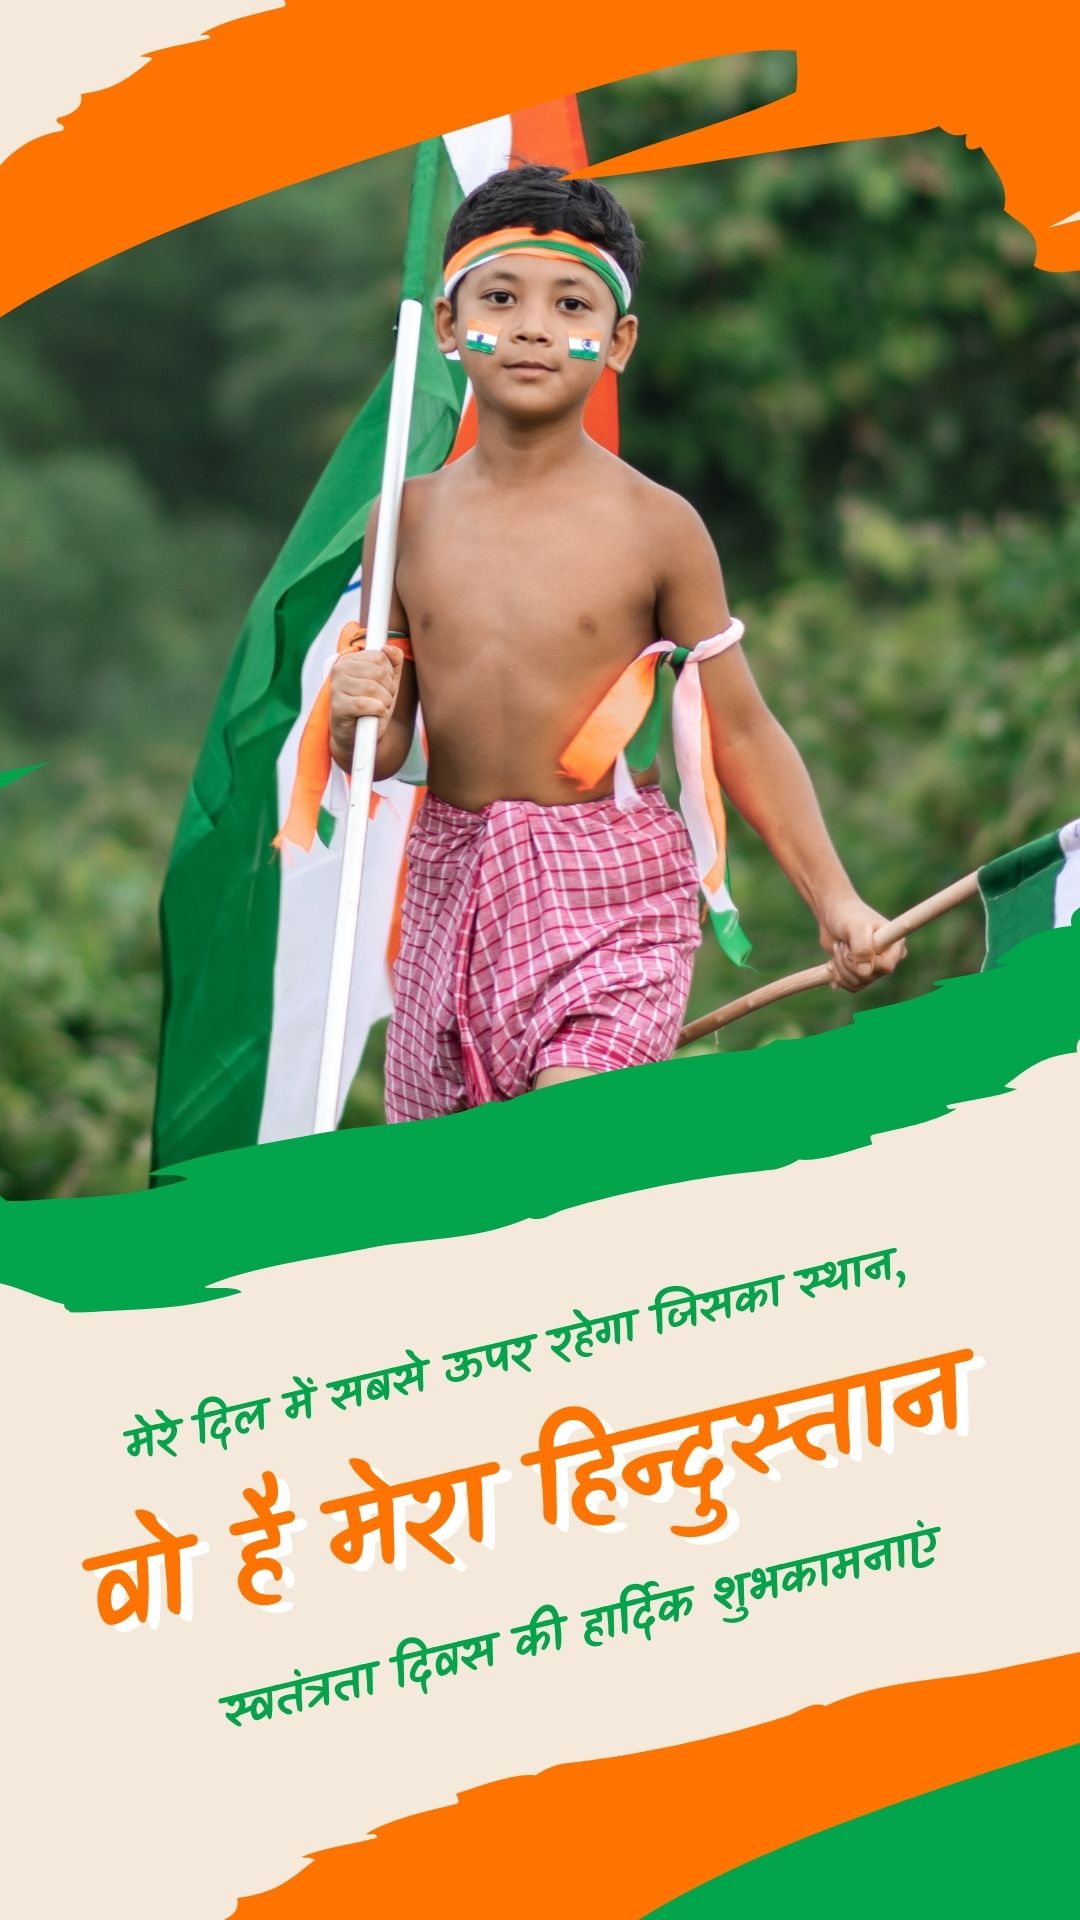 happy Independence Day 